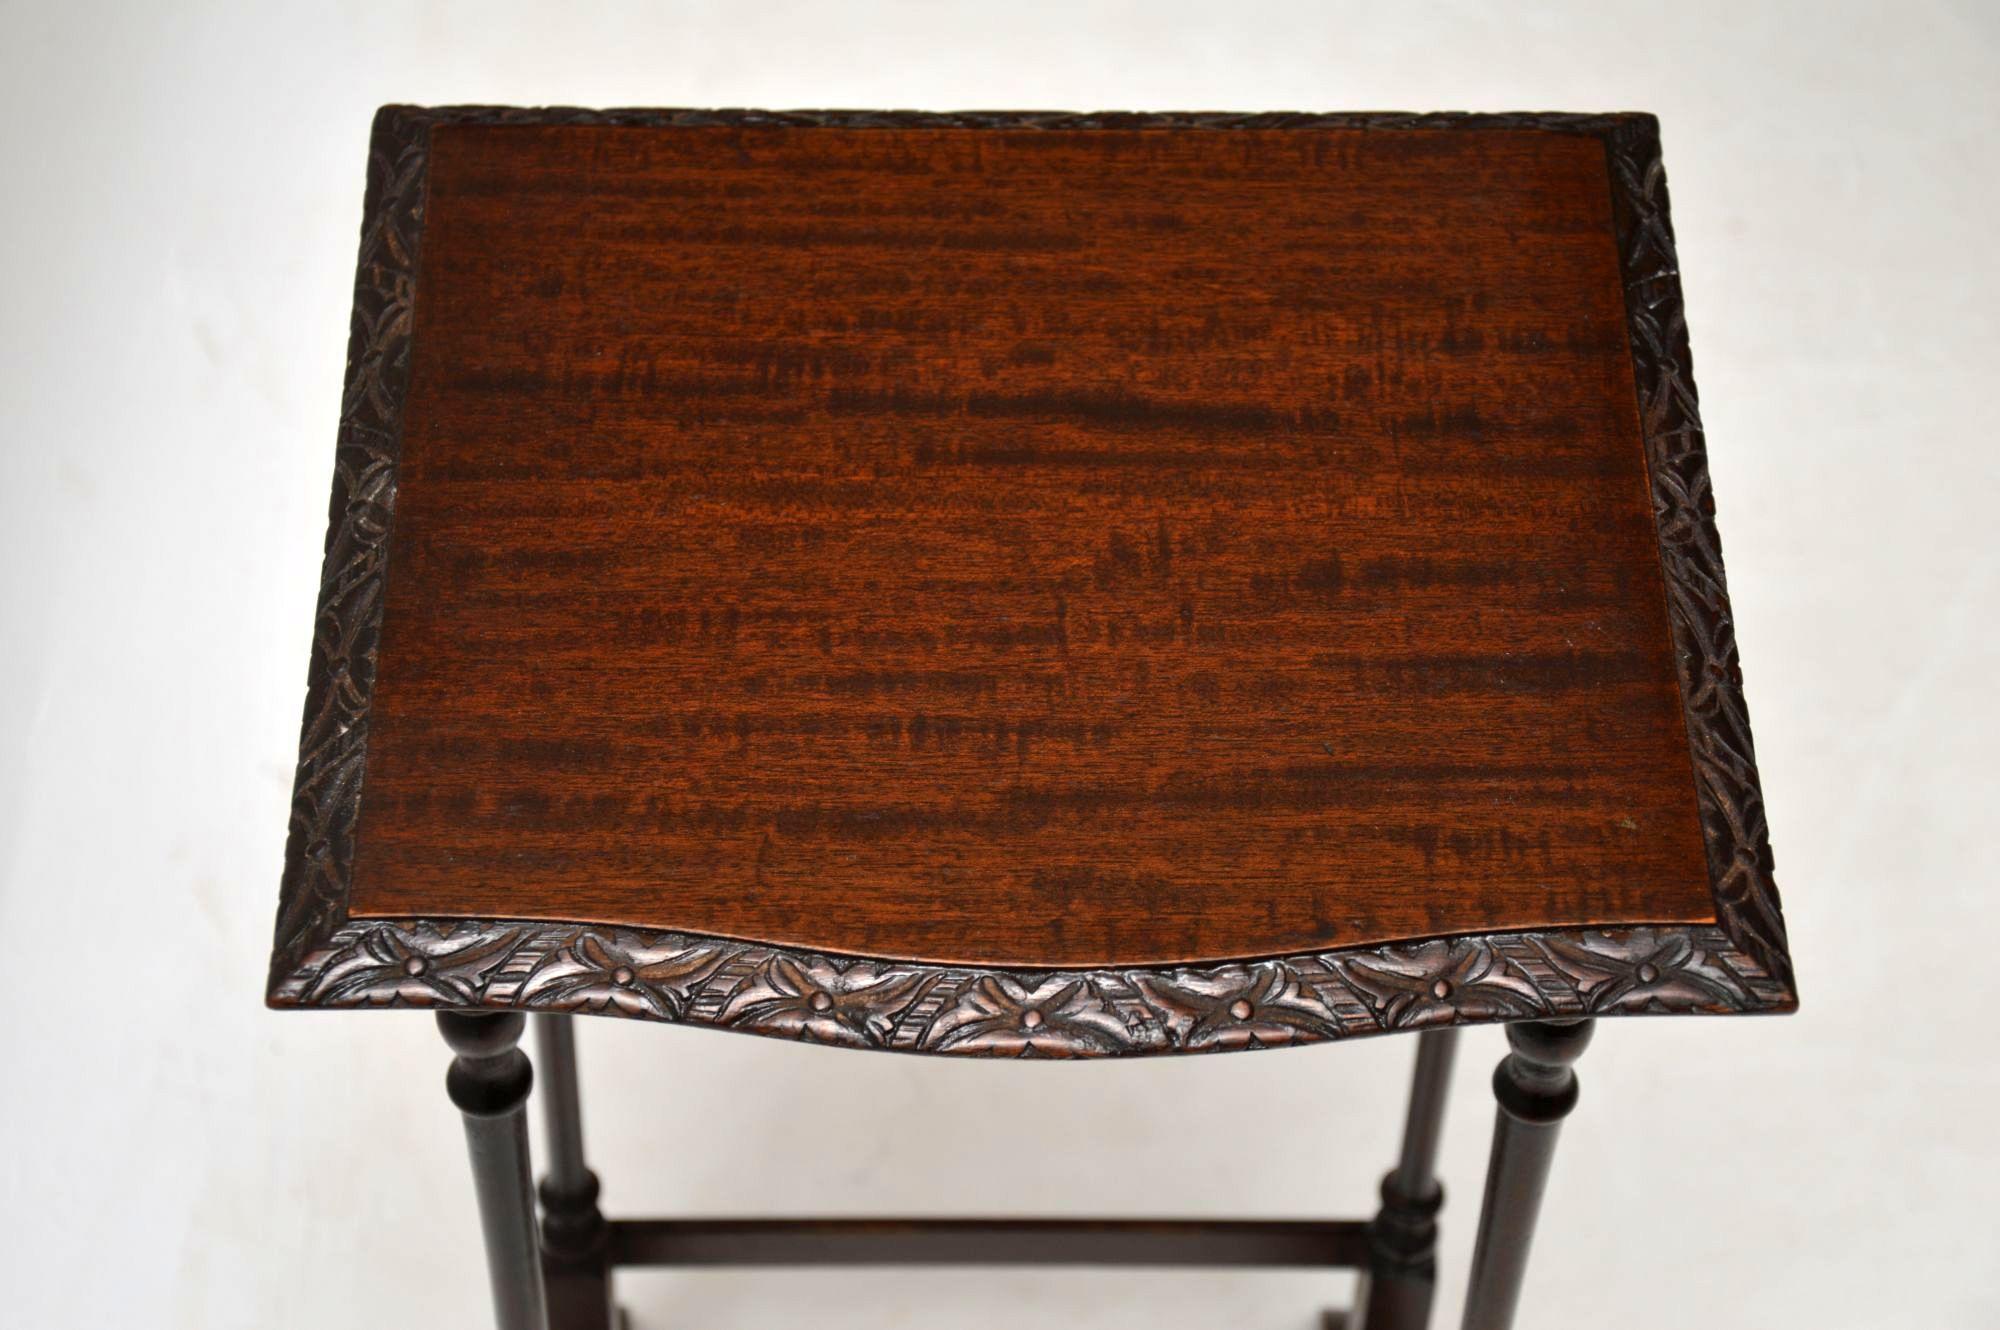 Early 20th Century Antique Mahogany Nest of Tables